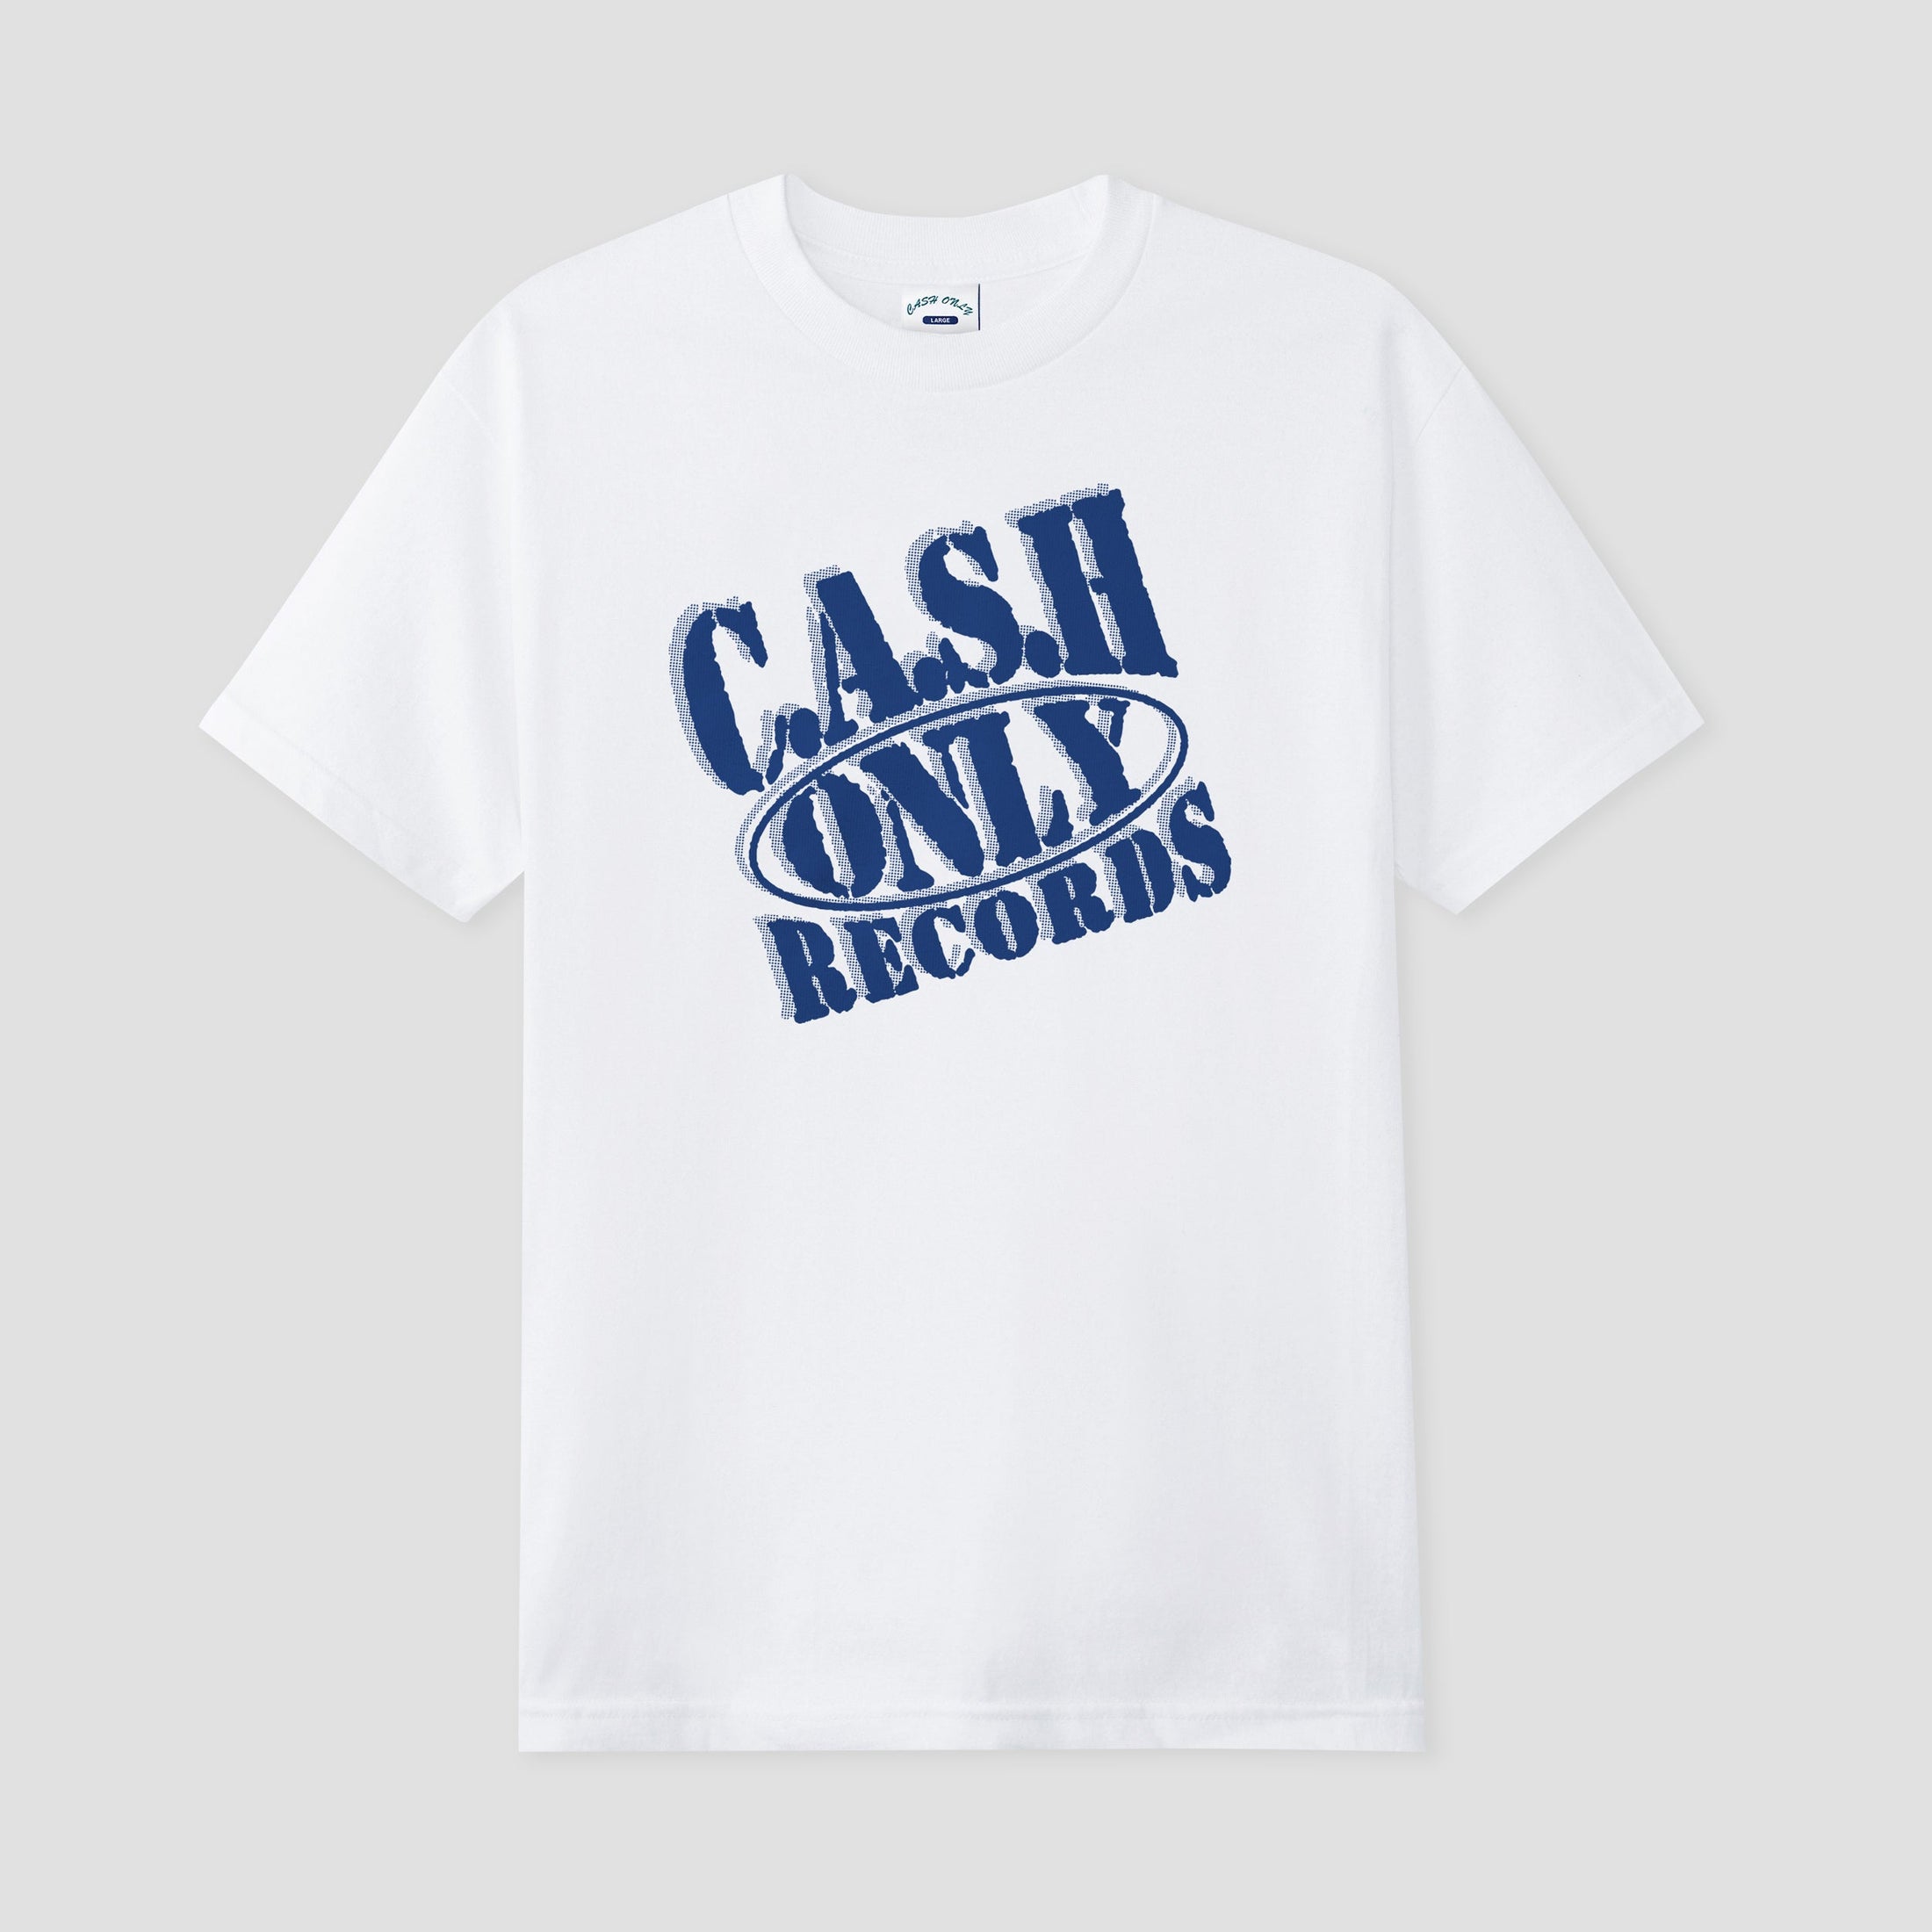 Cash Only Records T-Shirt White